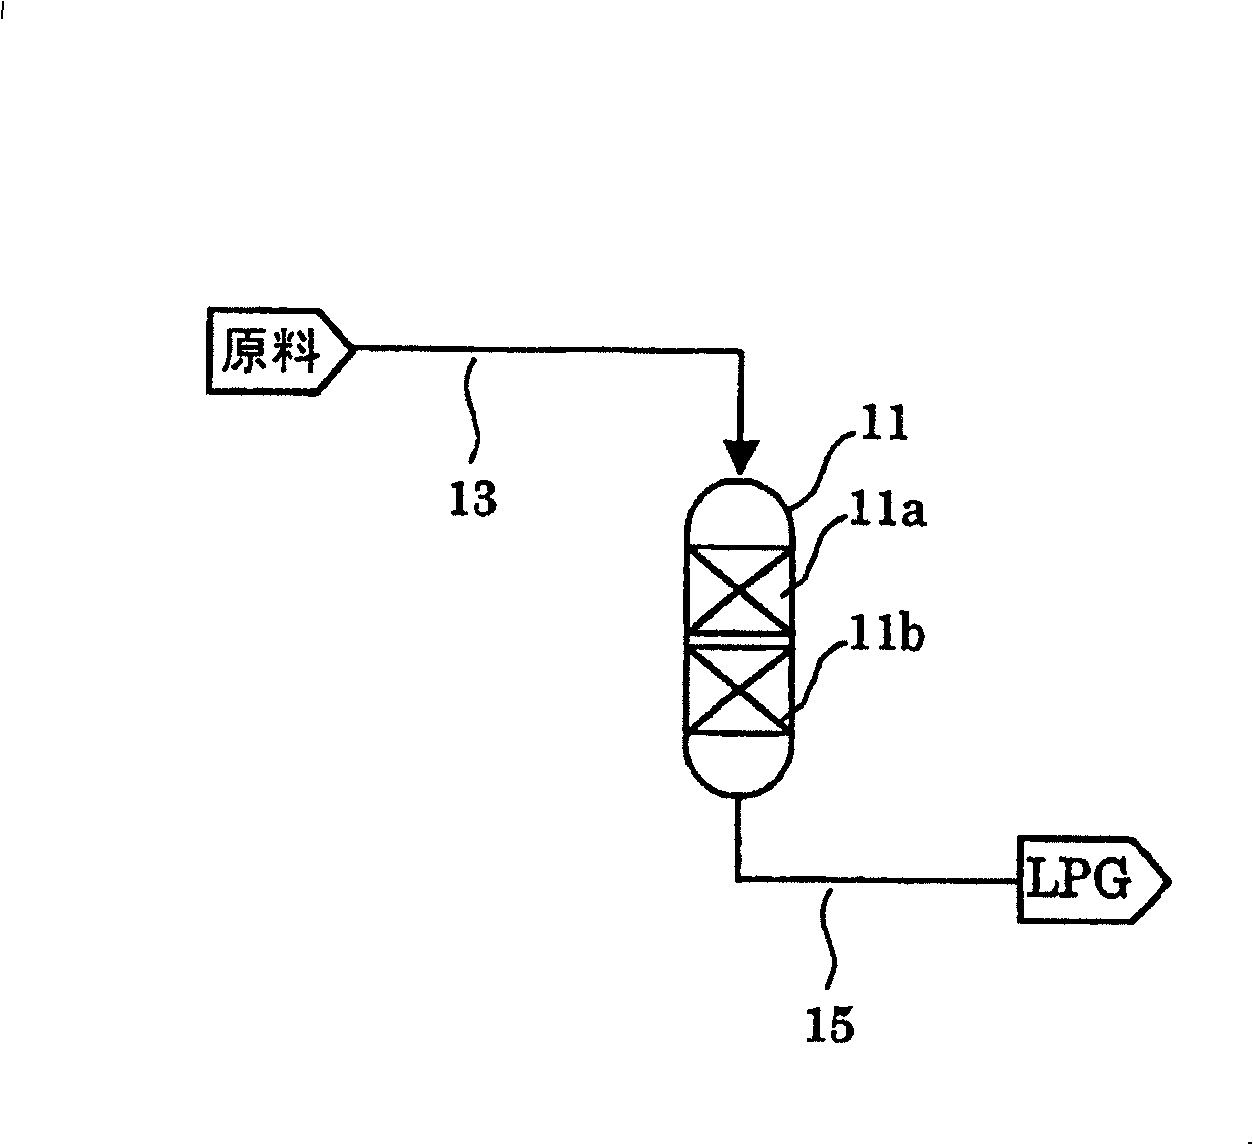 Method for producing liquefied petroleum gas